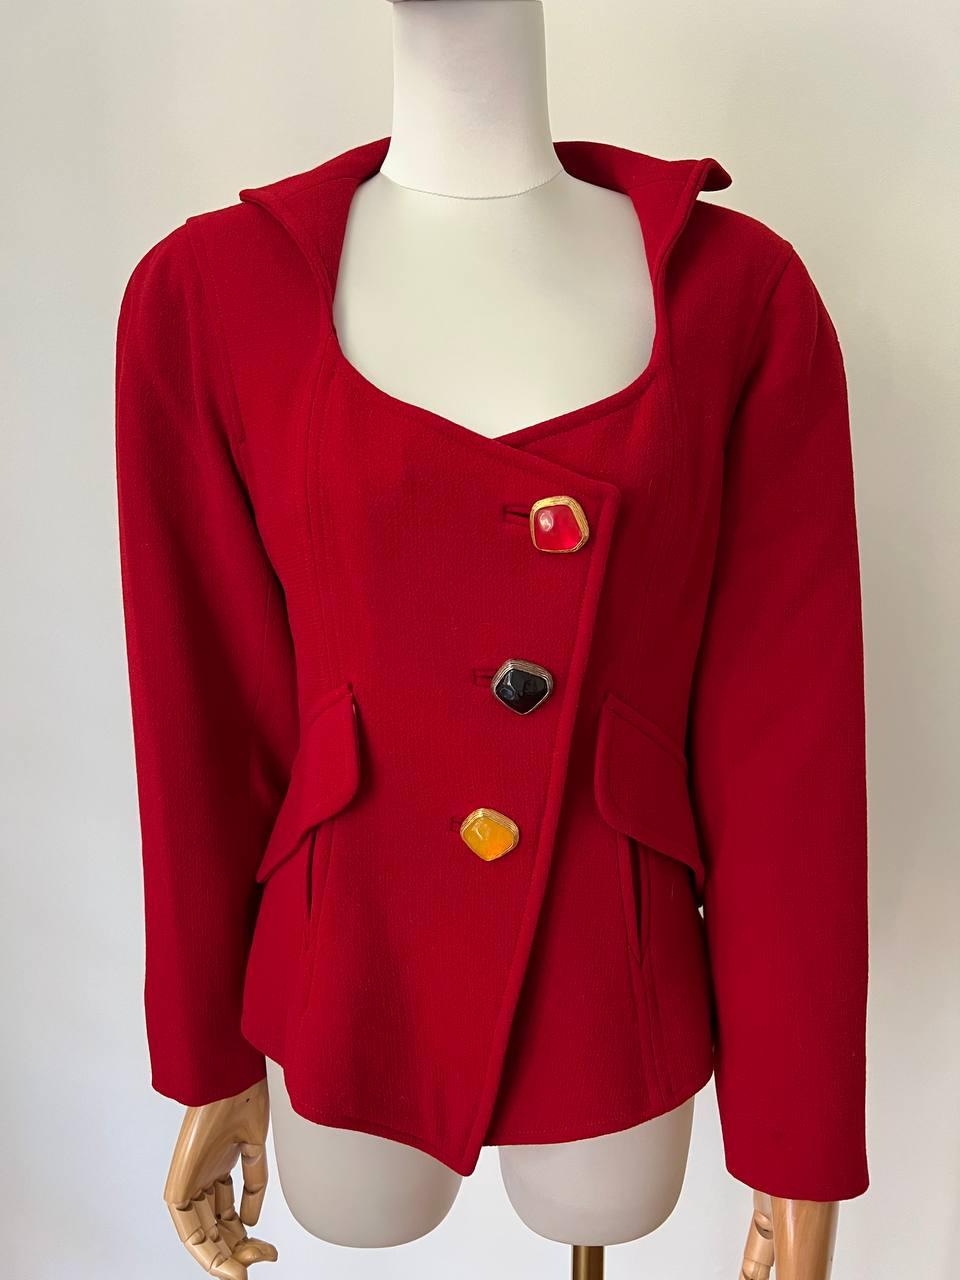 Vintage red blazer with Peter Pan collar and cabochon oversized buttons by Christian Lacroix. Padded shoulders. 
Ready To Wear Fall/Winter 1991-1992 Collection
Composition: 100% wool, lining: 100% acetate
Size: